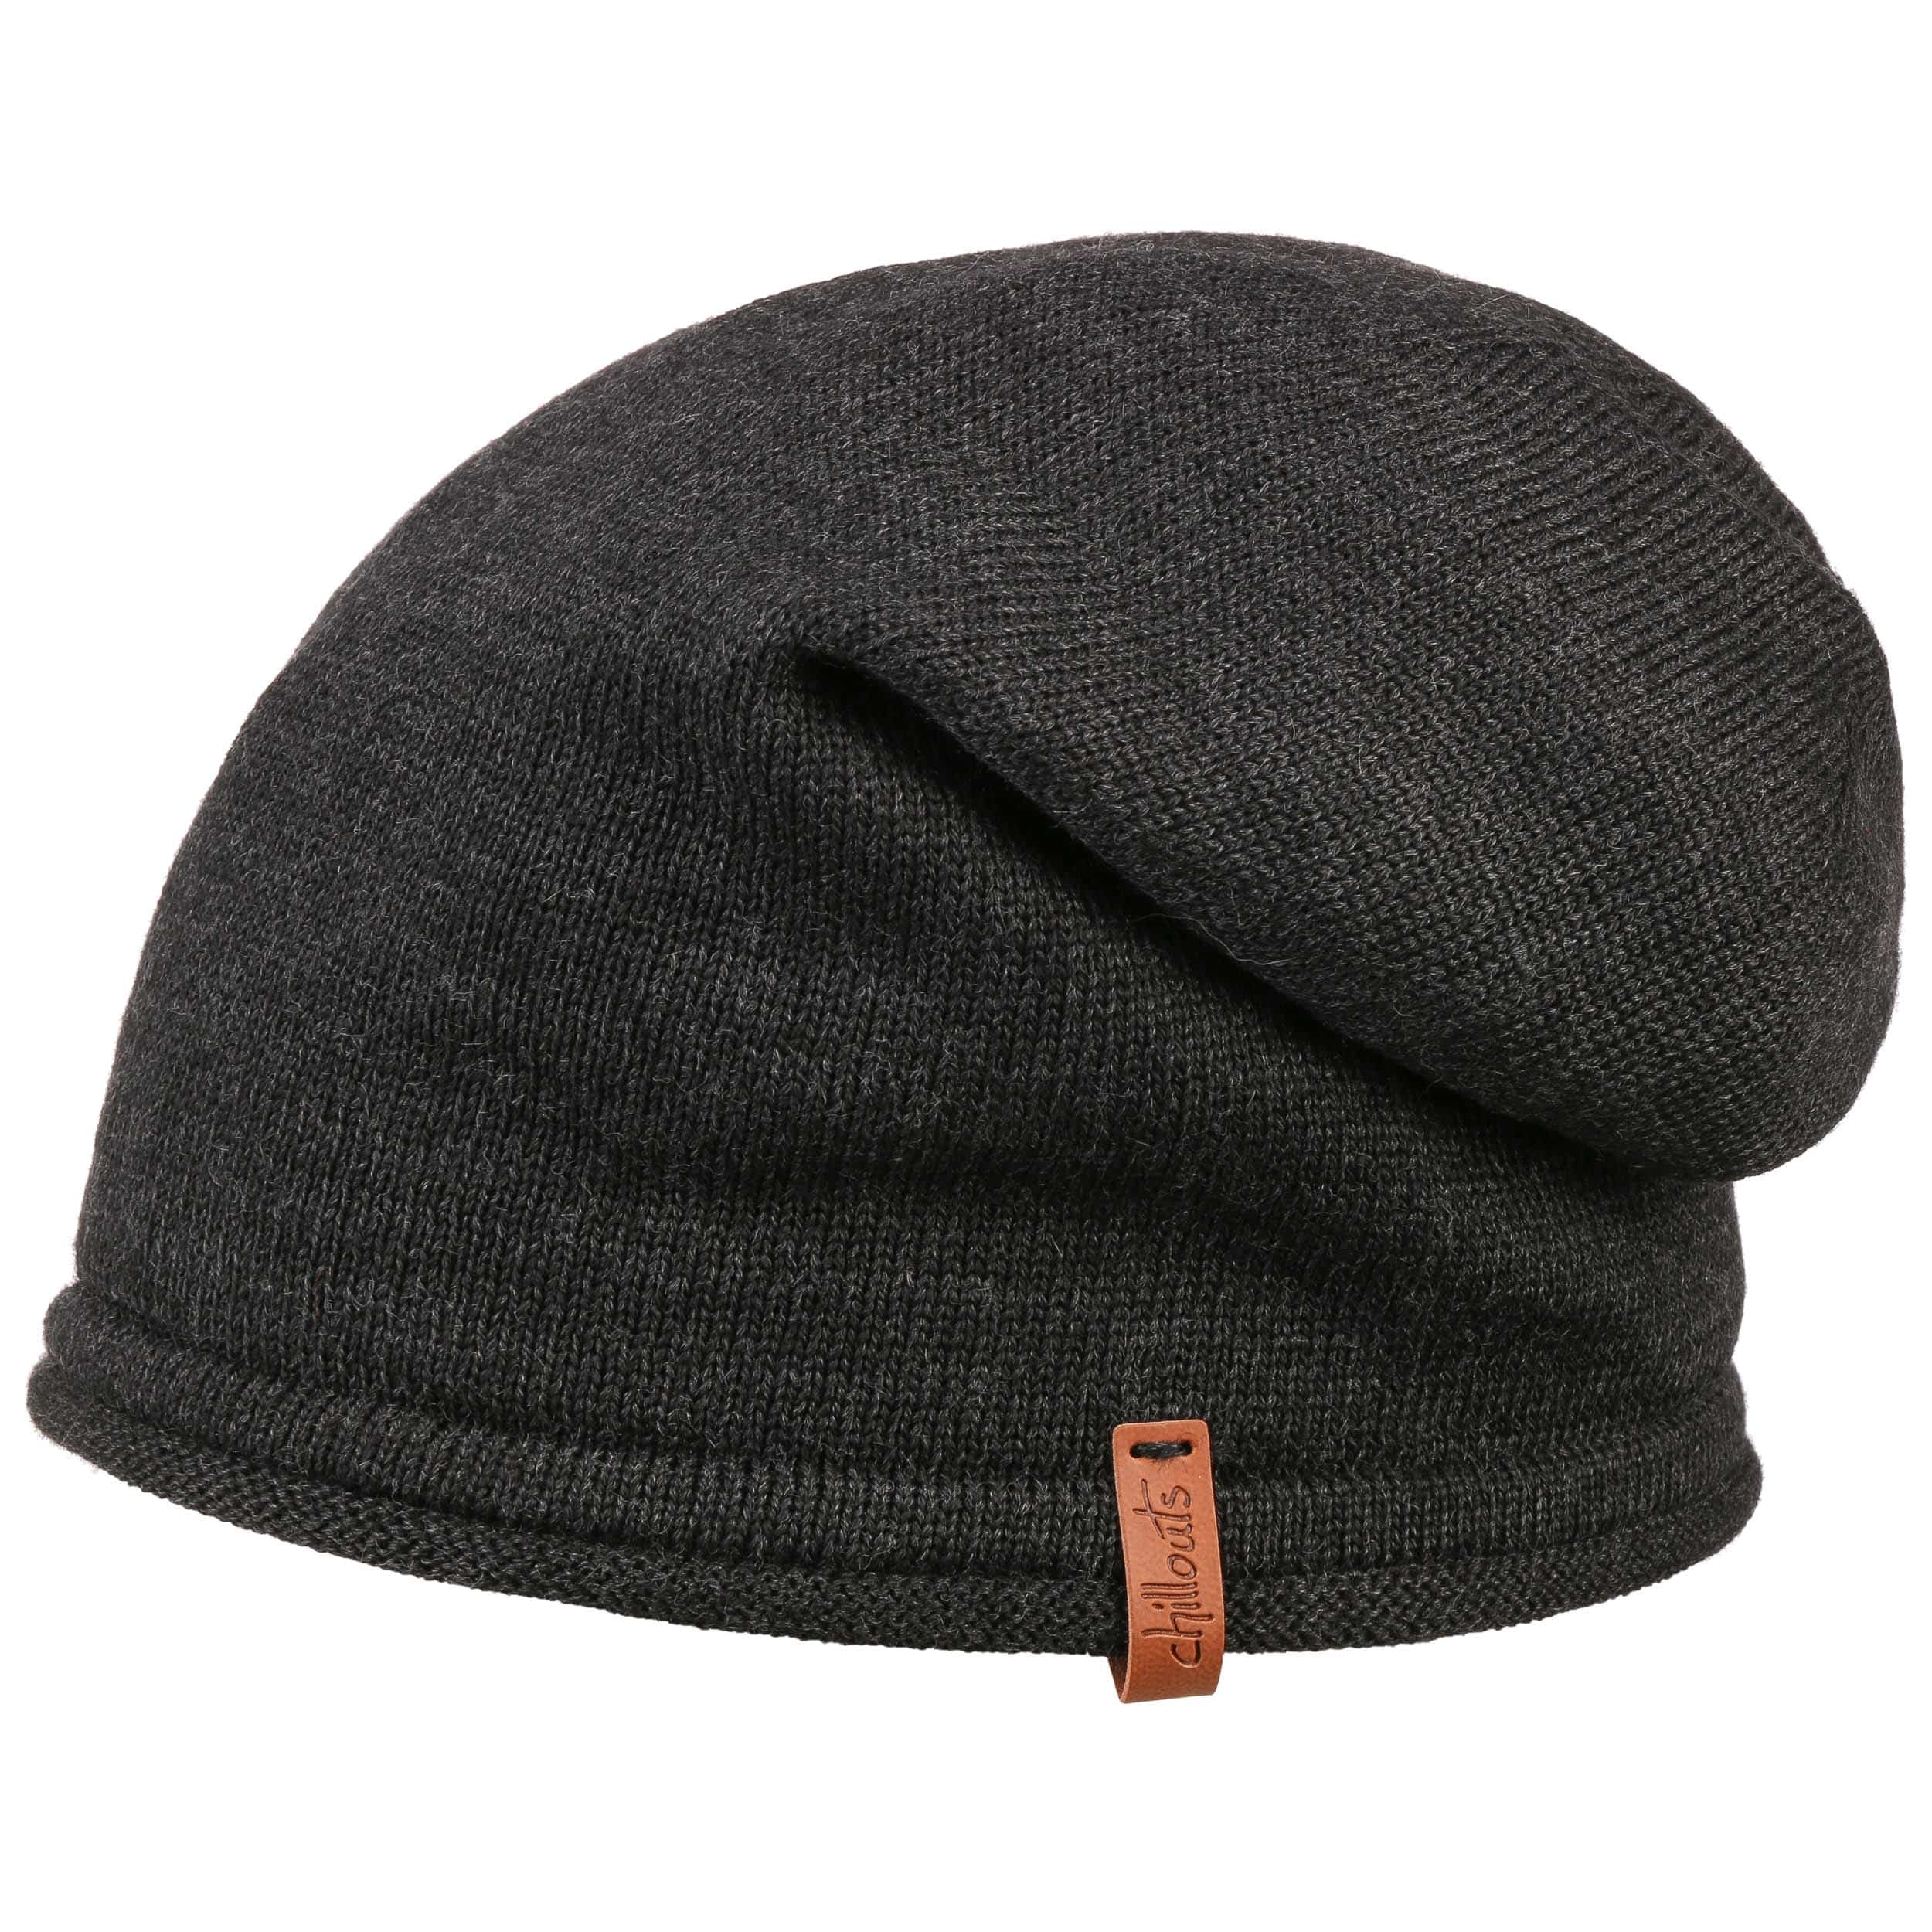 Leicester Oversize Beanie by - 29,95 Chillouts €